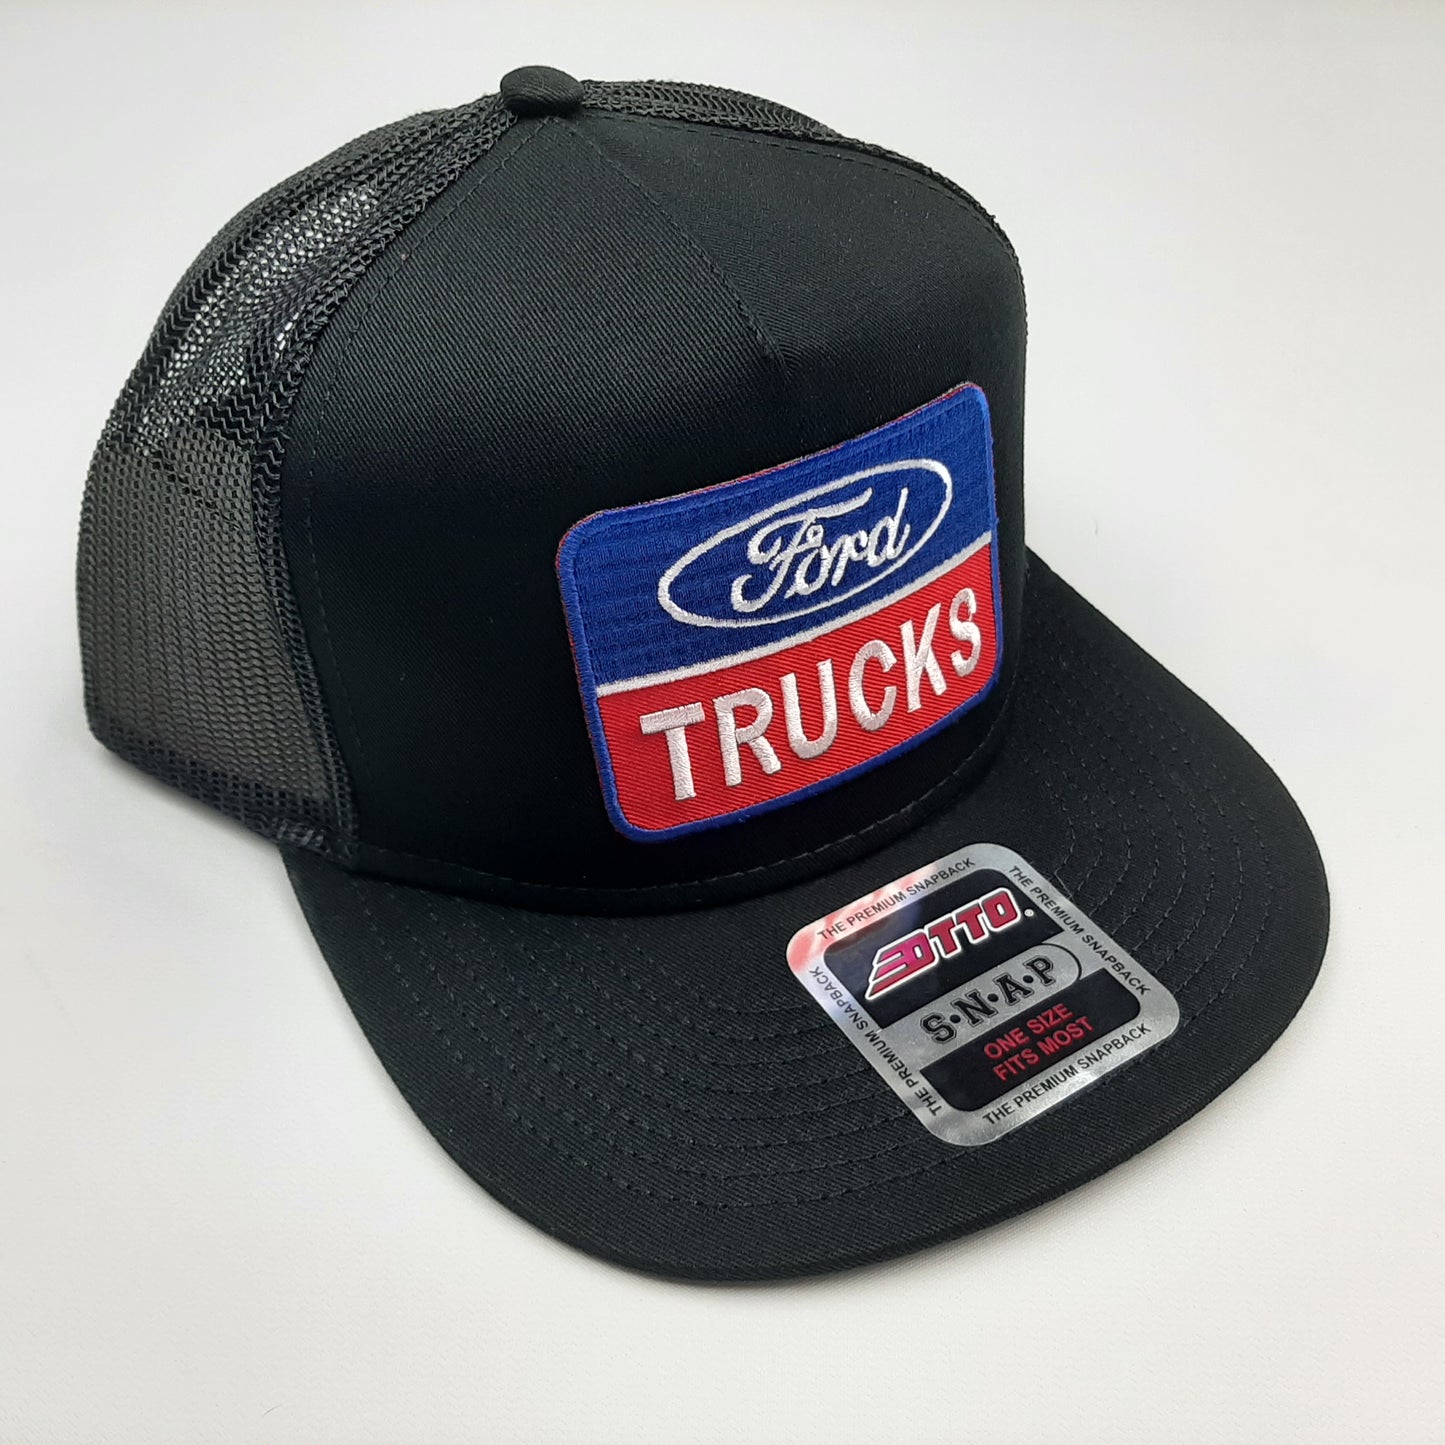 Ford Trucks Embroidered Patch Flat Bill Snapback Mesh Hat Cap OTTO Black